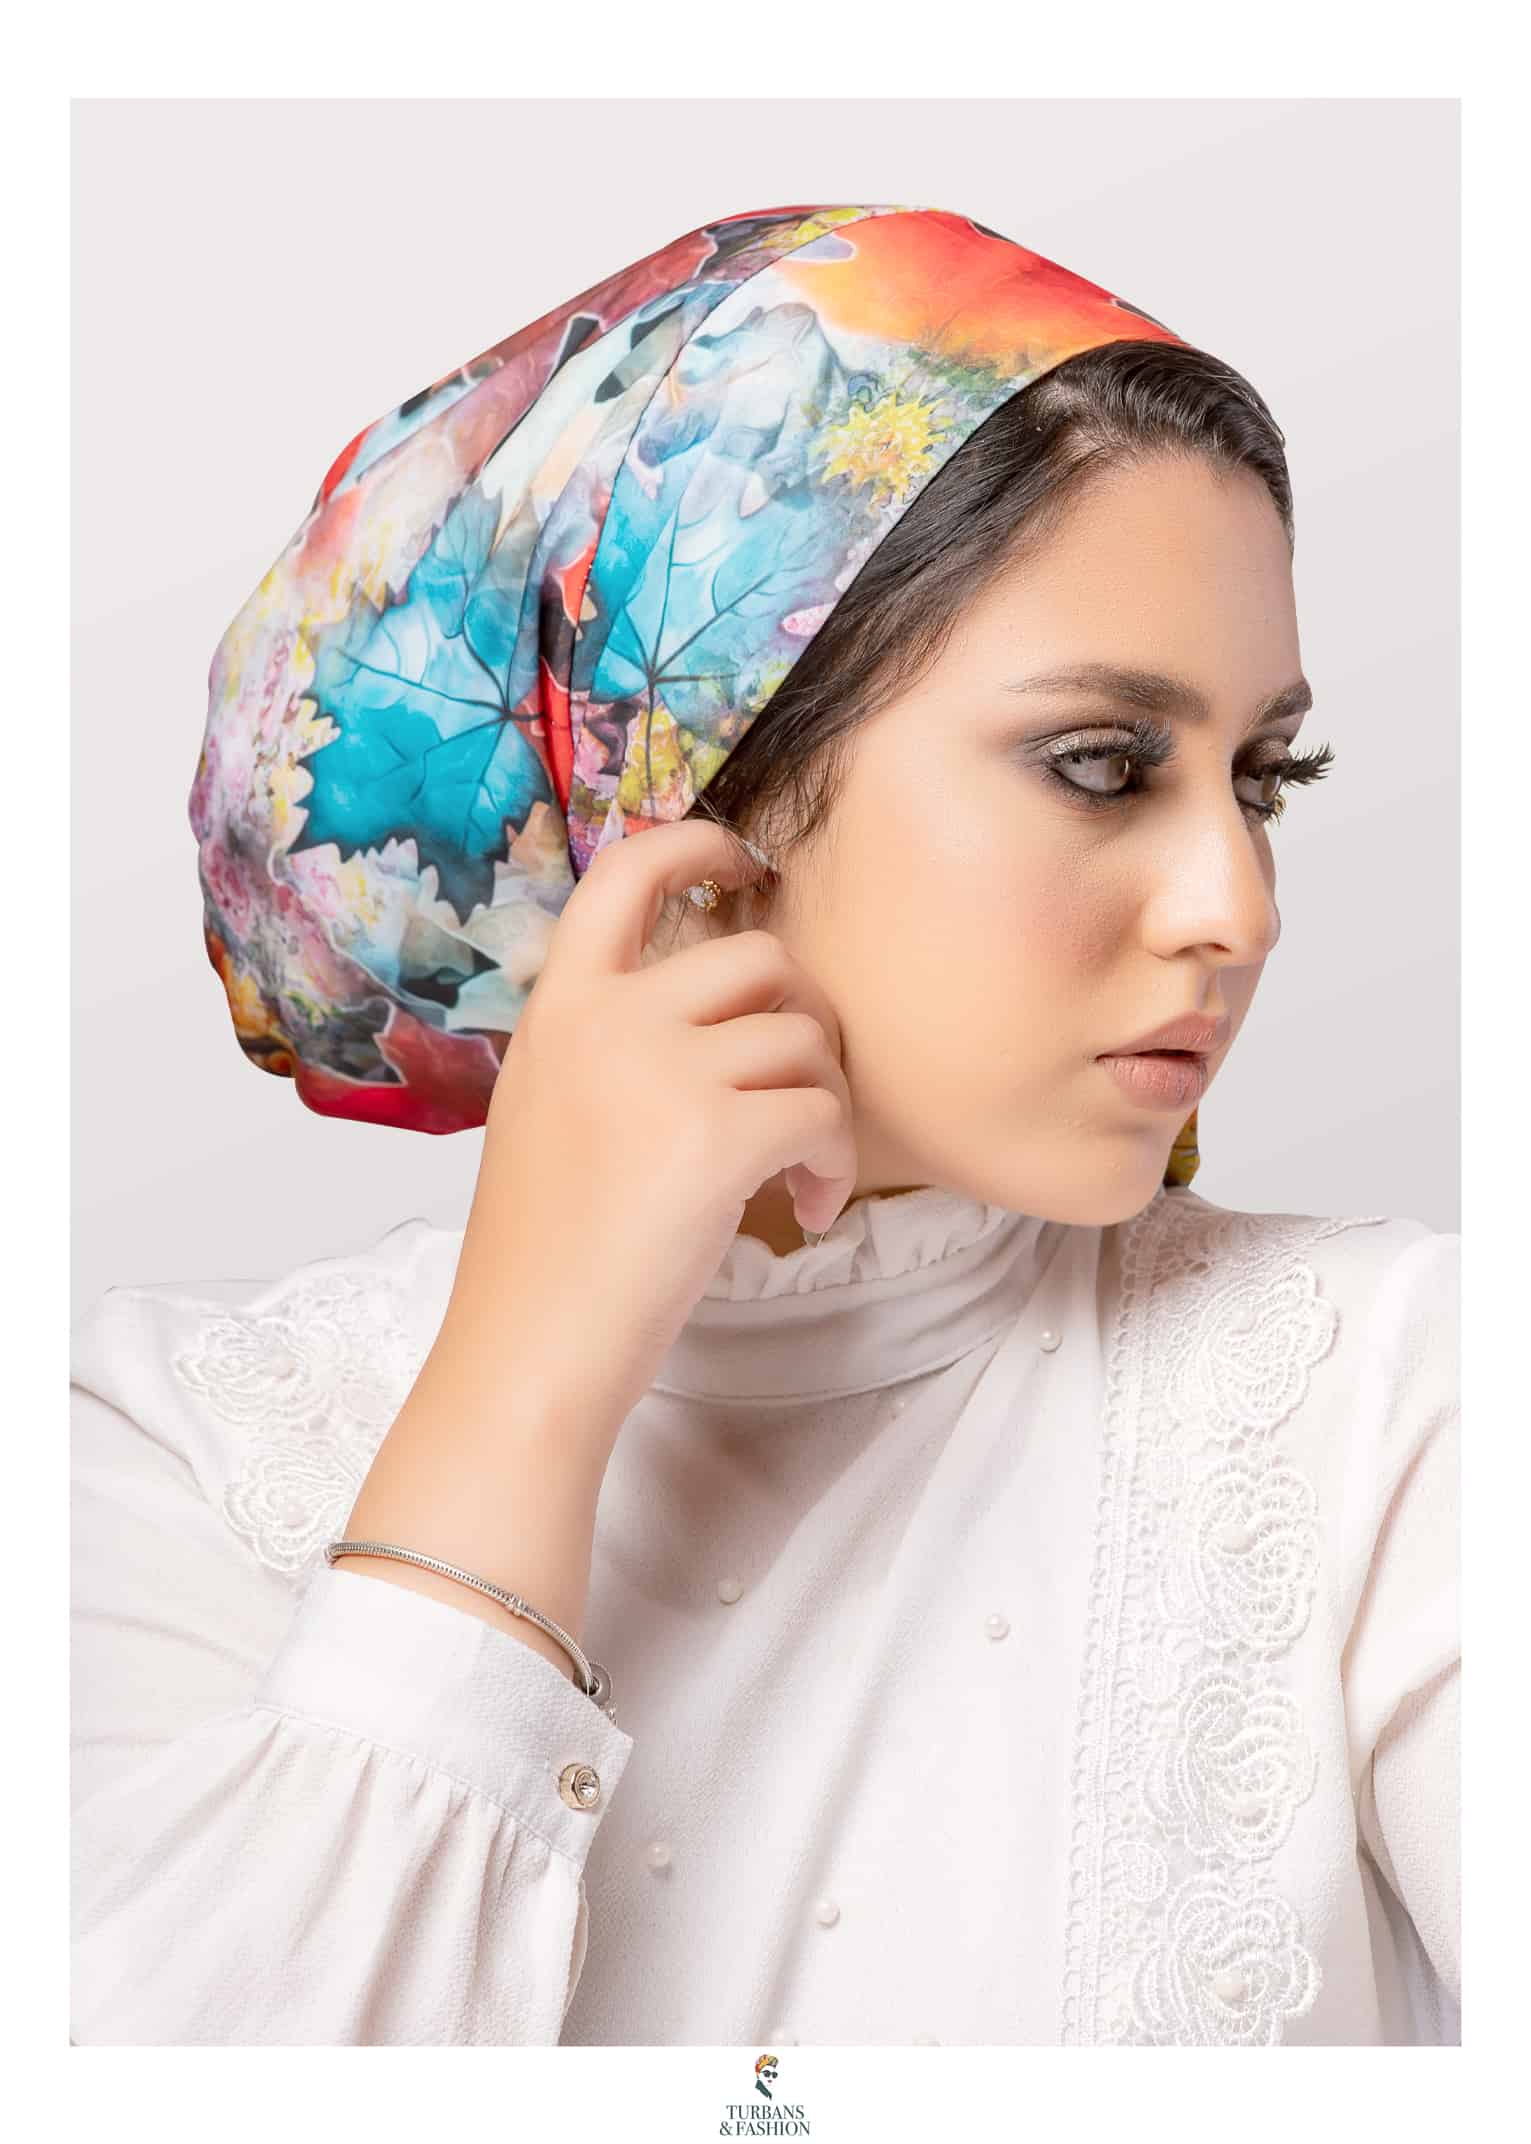 Stylish and Colorful Versatile 2-Way Soft Tie One-Piece Multi-Color Turban in Soft Fabric